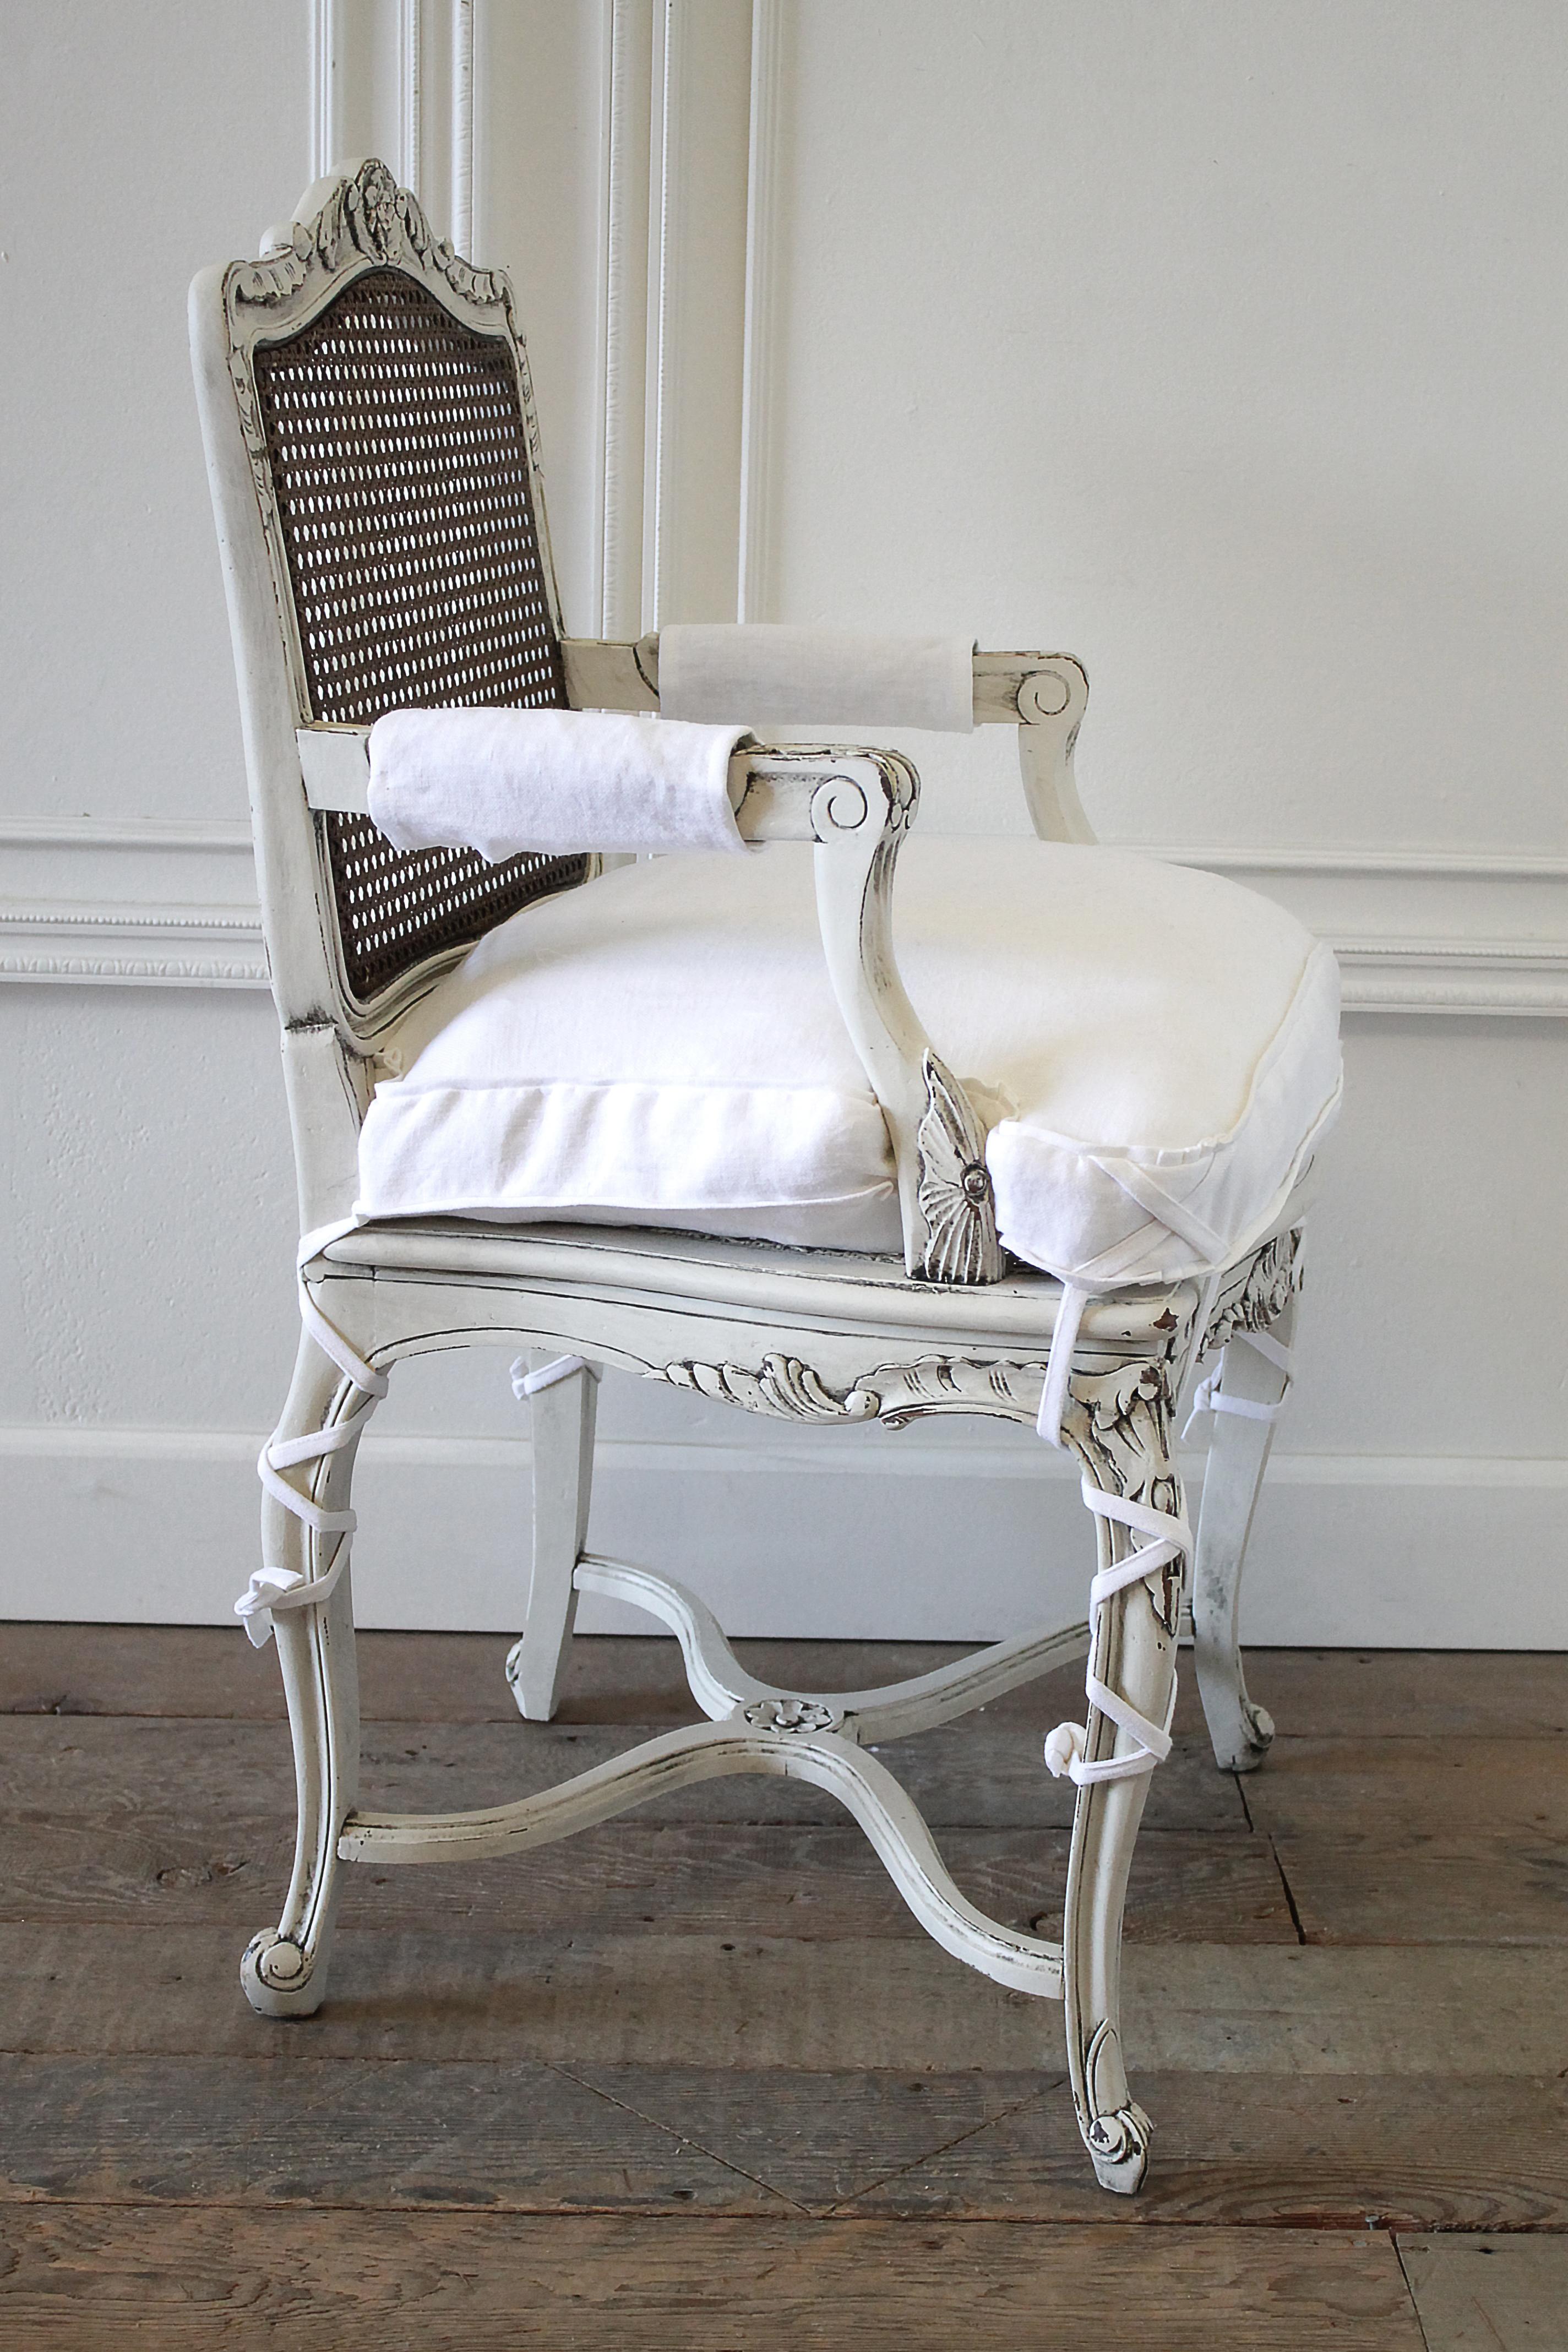 19th century country French cane back chair with linen cushion
Beautiful antique chair painted in oyster white finish light distressed edges, and antique glazed patina, with natural cane back, very solid and sturdy ready for everyday use. We made a